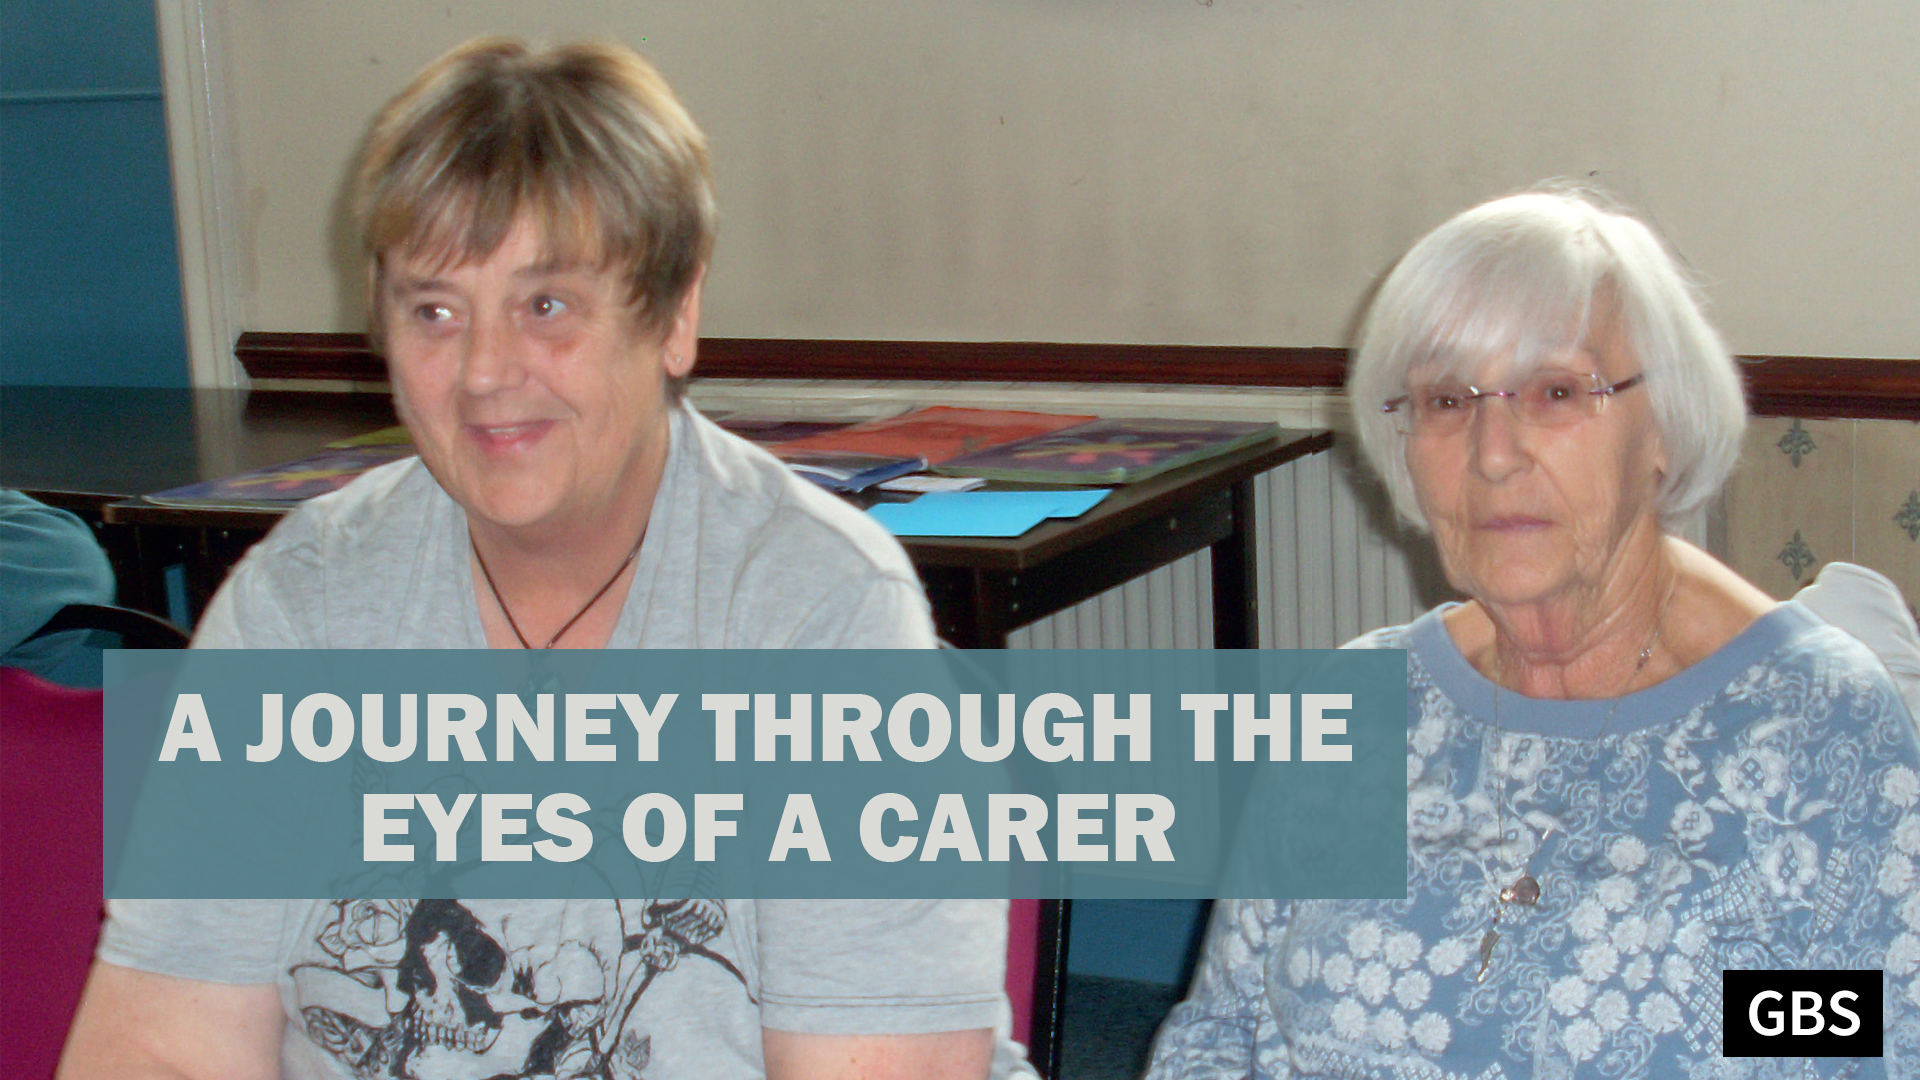 A Journey through the eyes of a carer